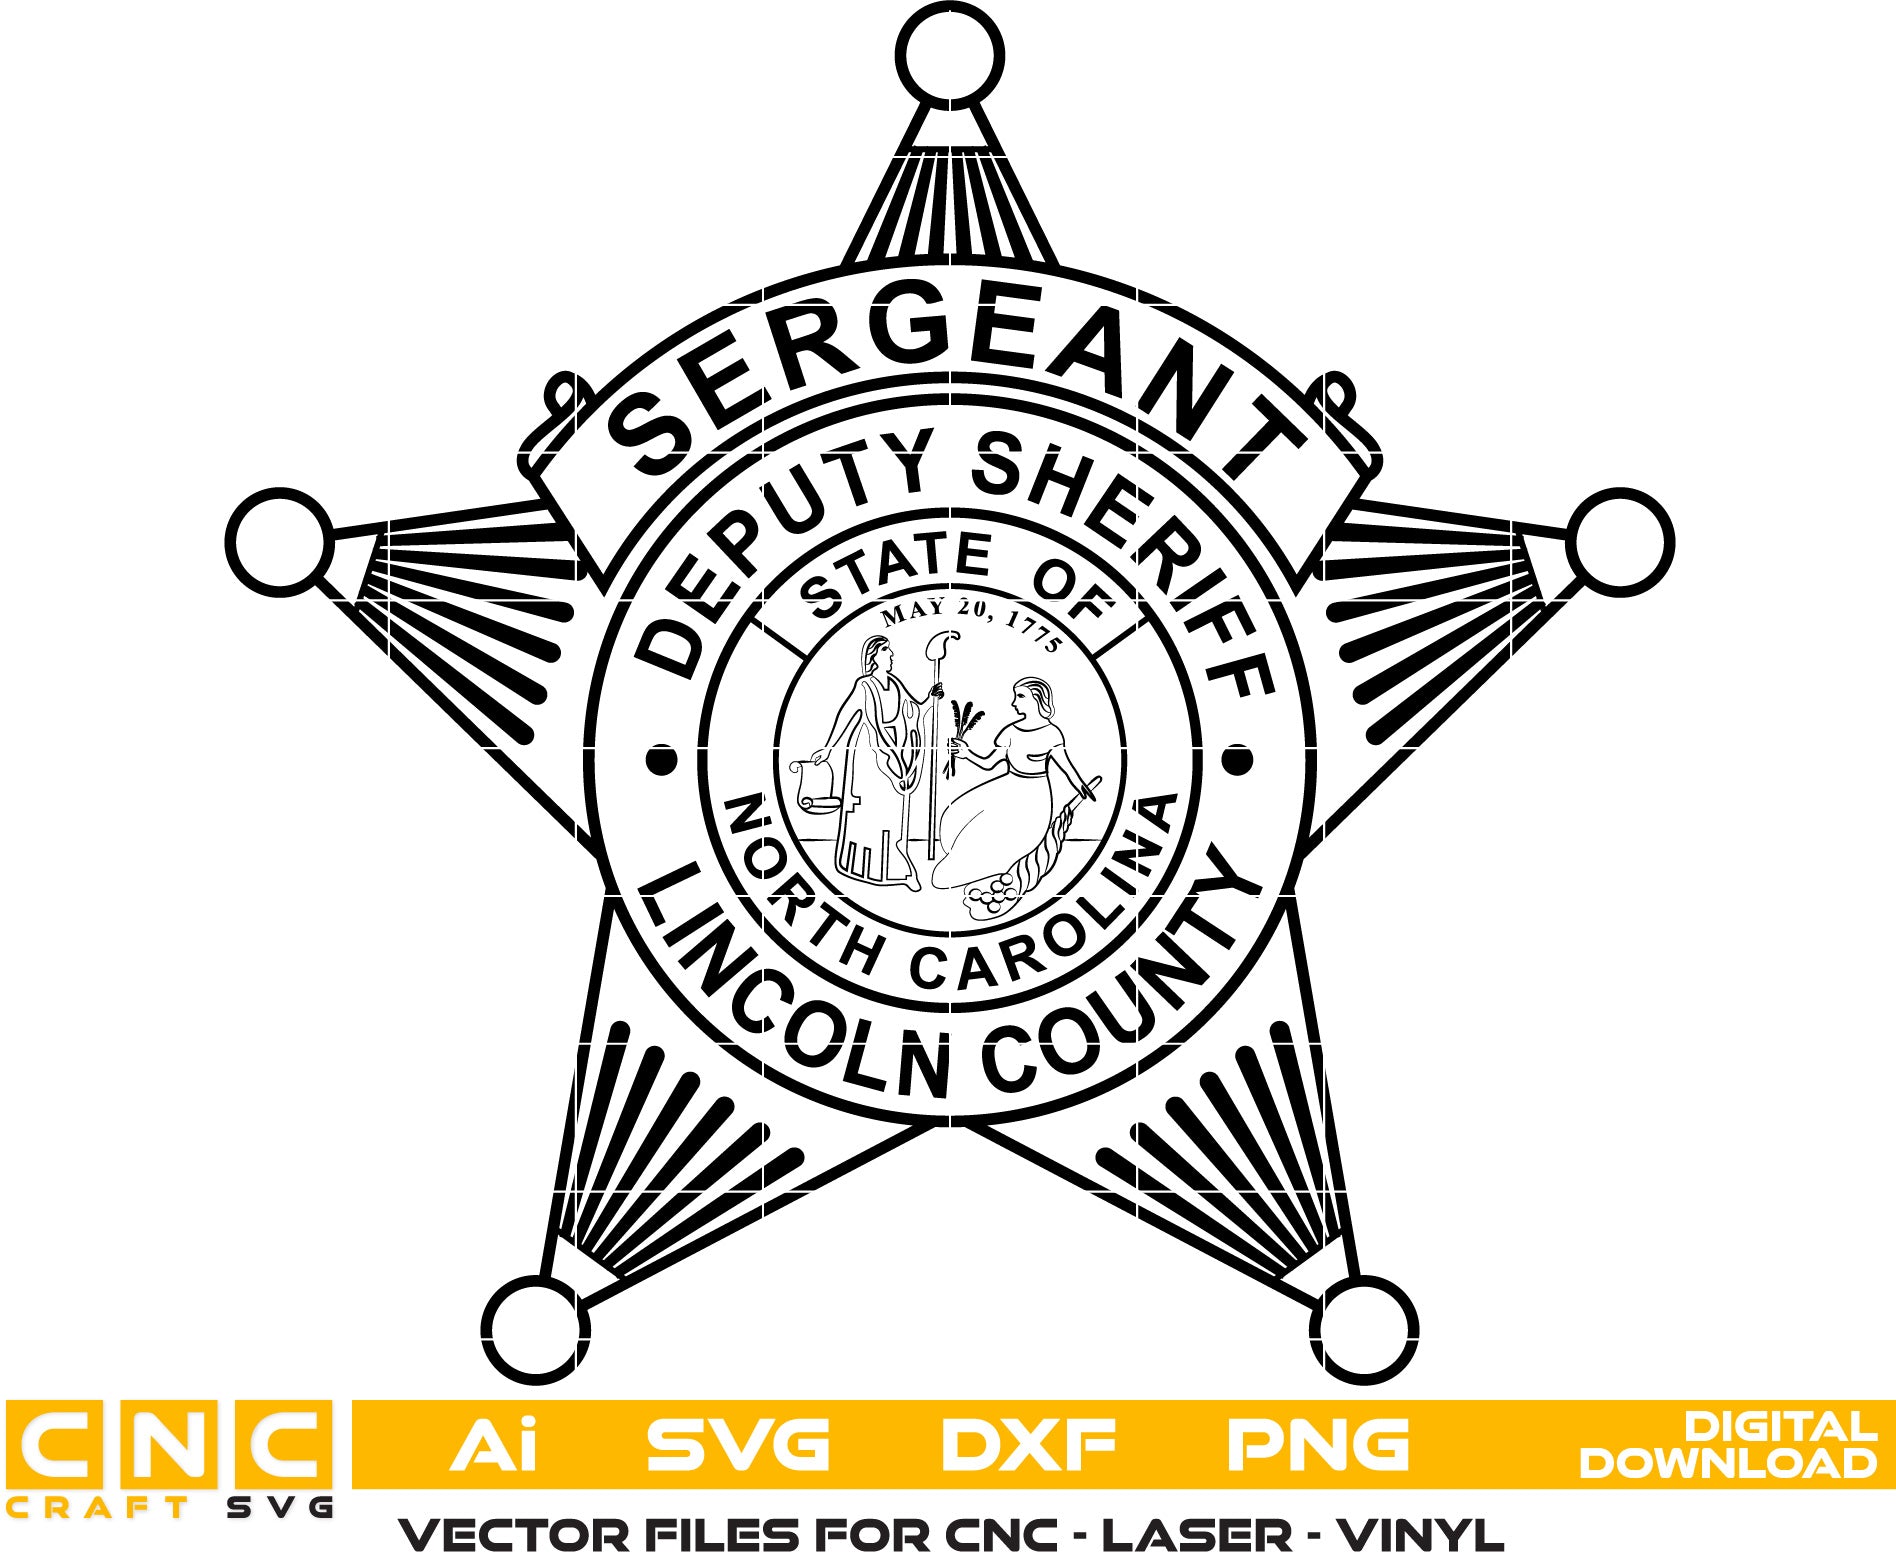 Lincoln County Deputy Sheriff Sergeant Badge Vector Art, Ai,SVG, DXF, PNG, Digital Files